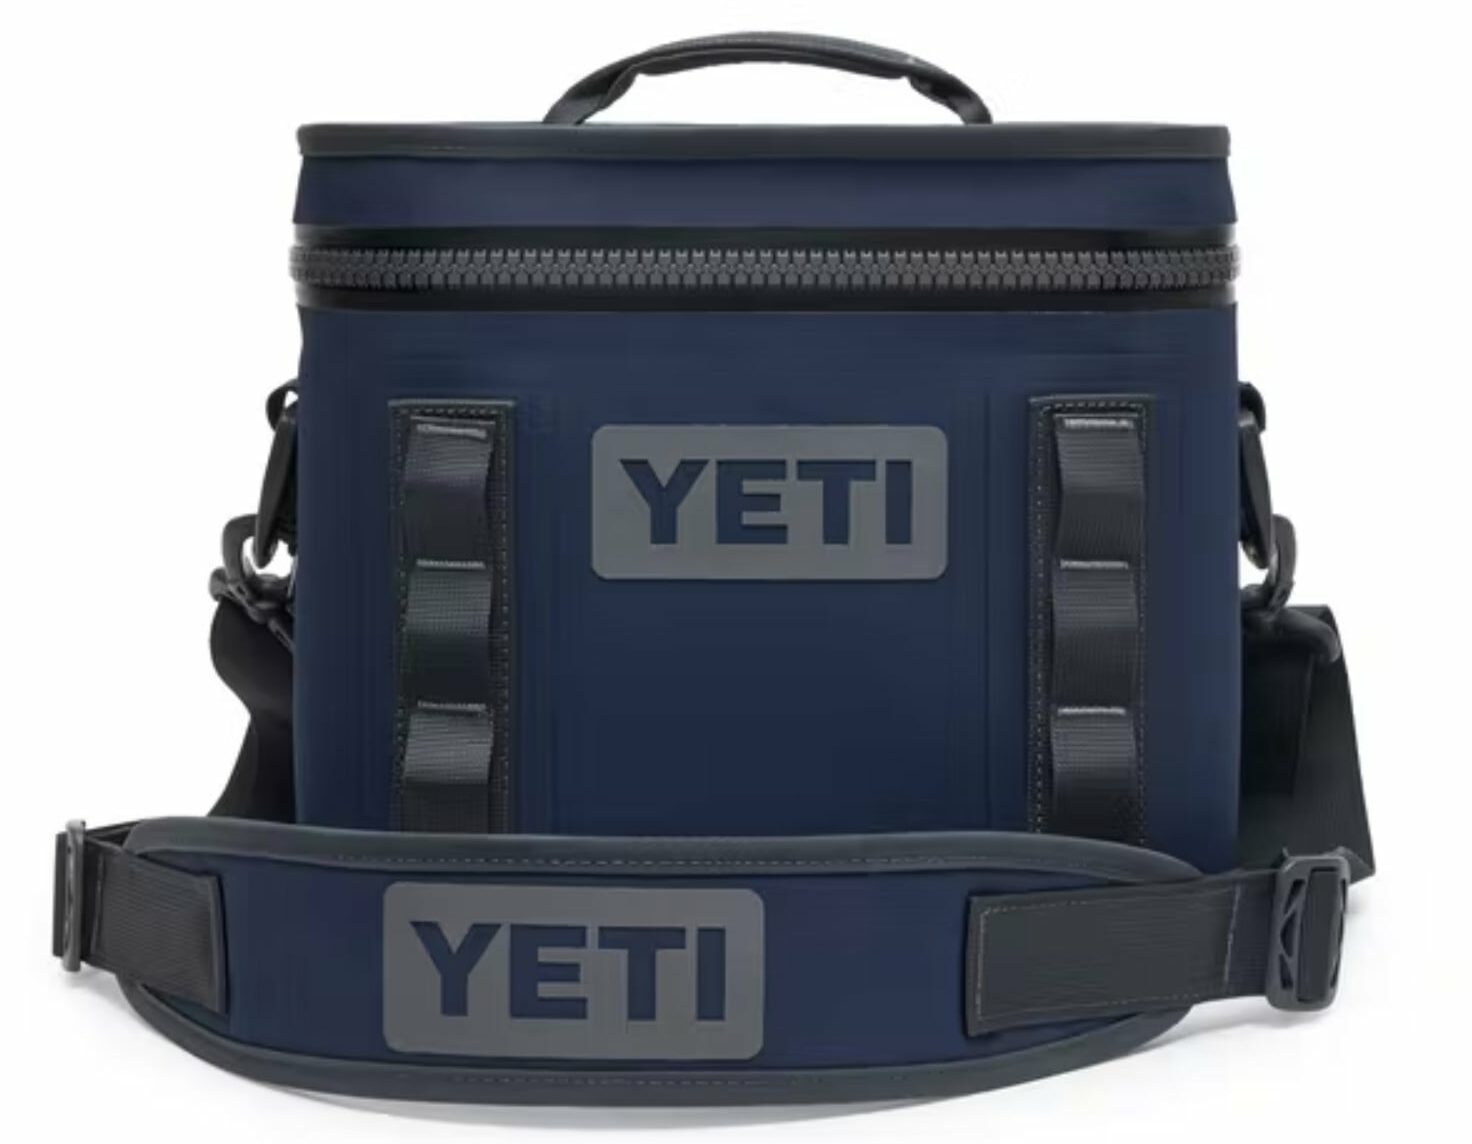 image of a navy blue yeti cooler